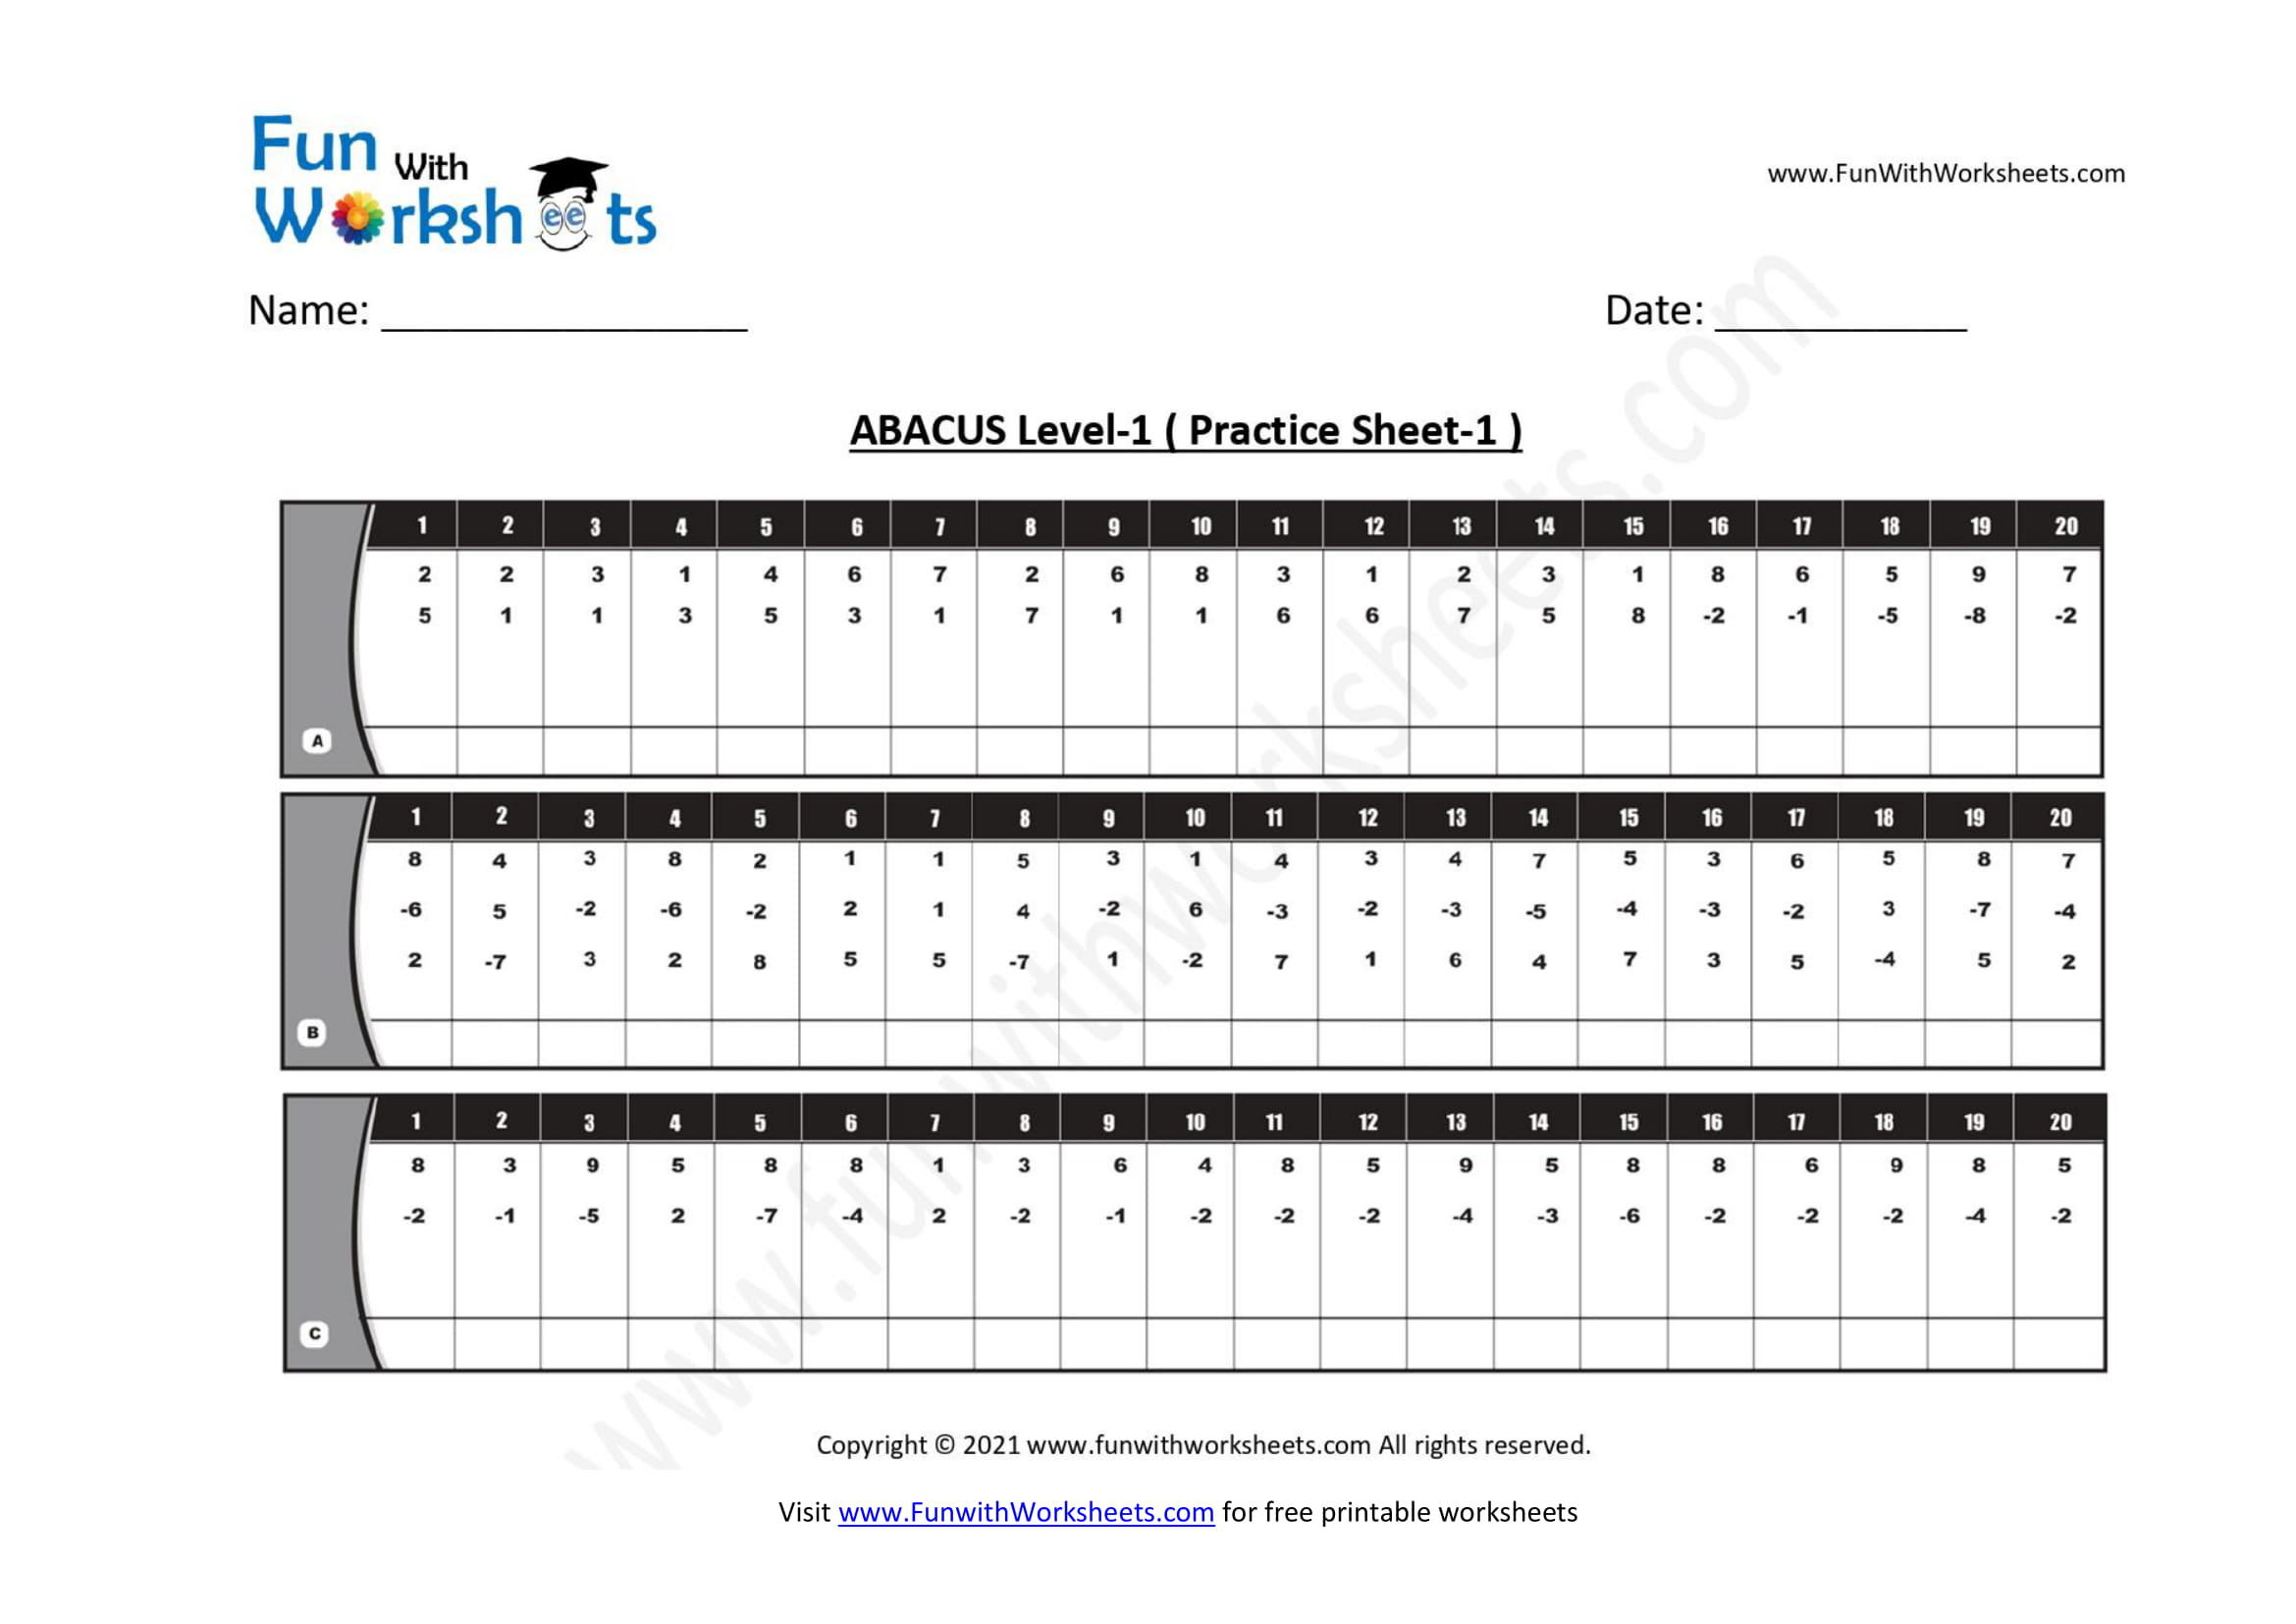 Abacus Practice Worksheets Level 1 - Funwithworksheets intended for Free Printable Abacus Worksheets